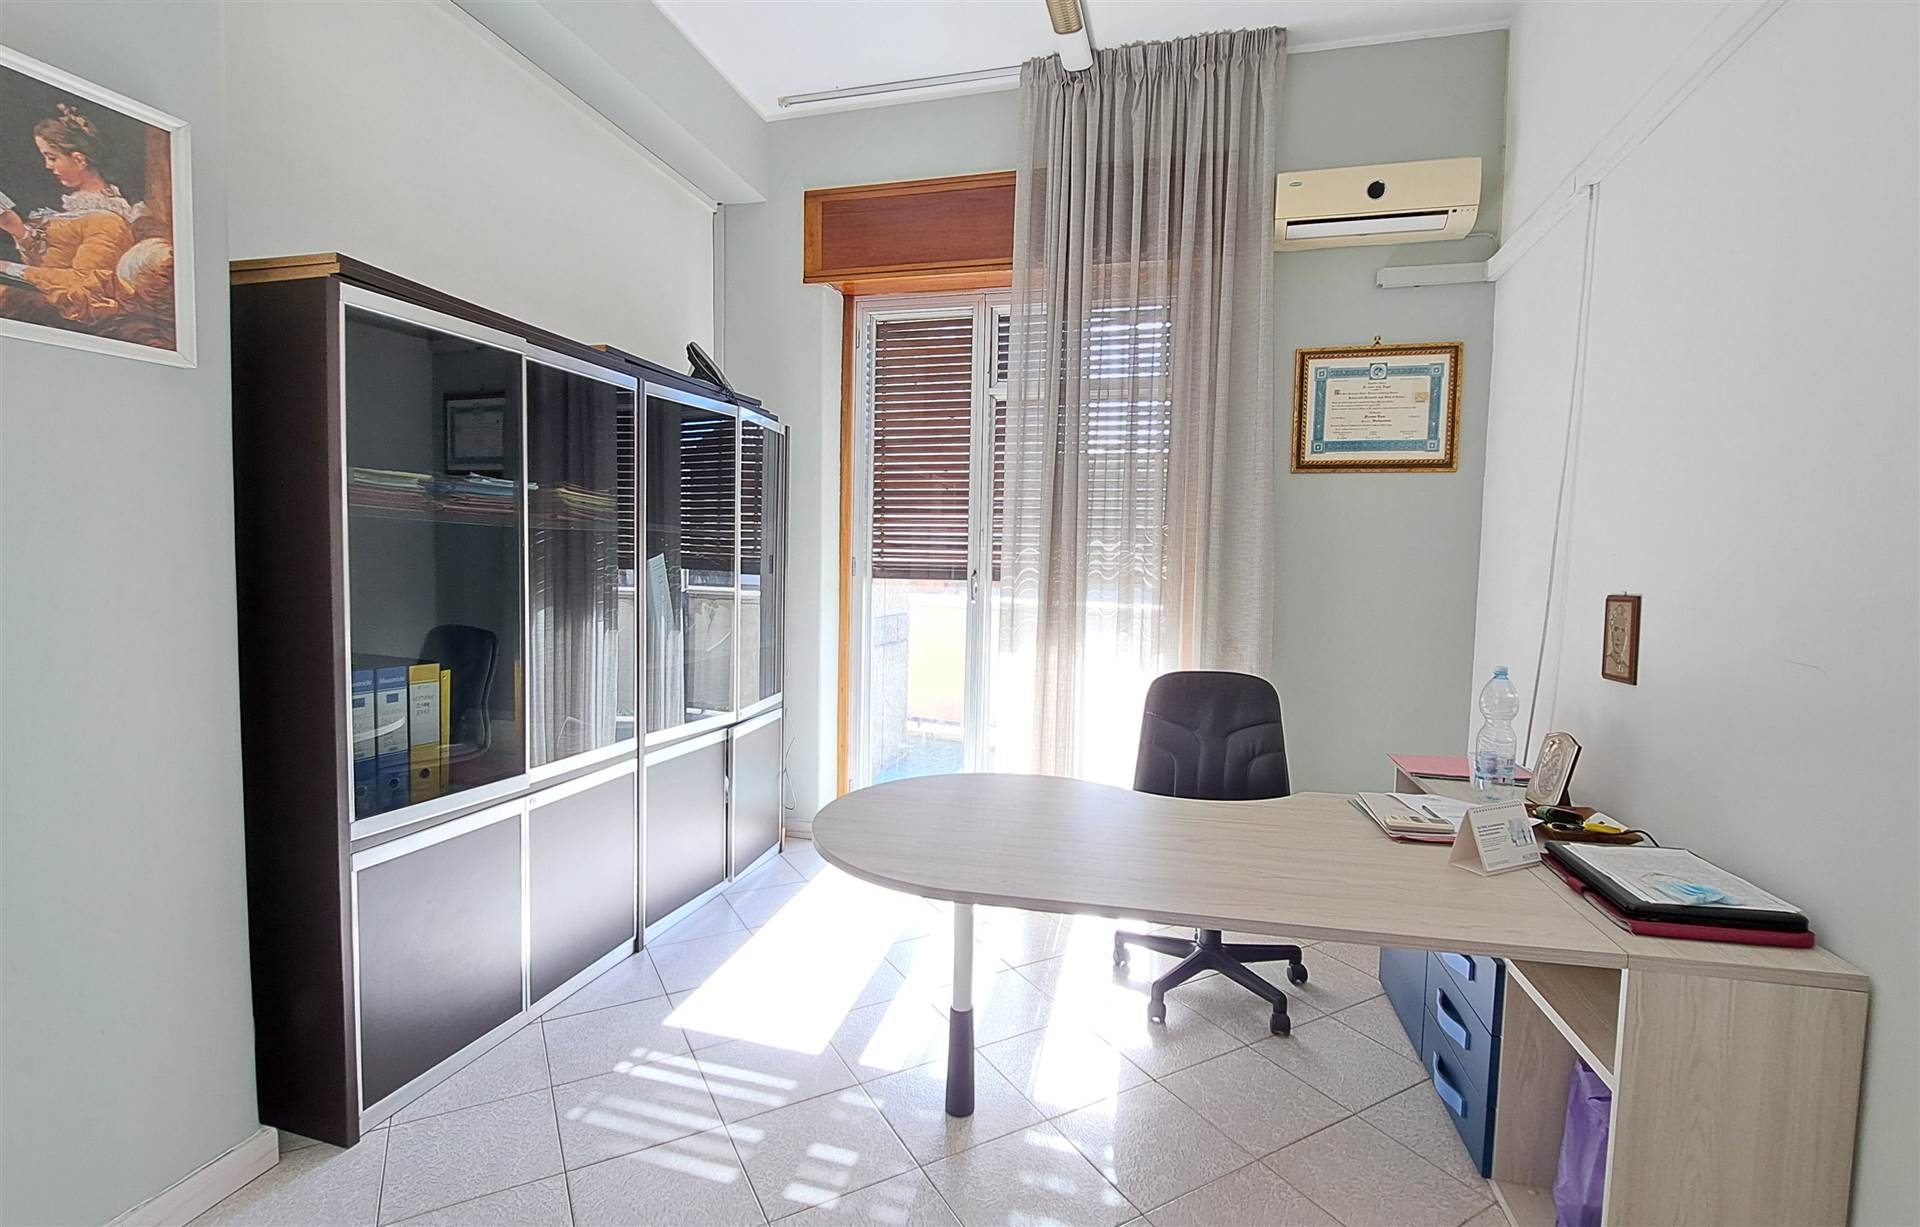 PIAZZA STESICORO / CORSO SICILIA, CATANIA, Office for sale of 240 Sq. mt., Good condition, Heating Individual heating system, Energetic class: F, 